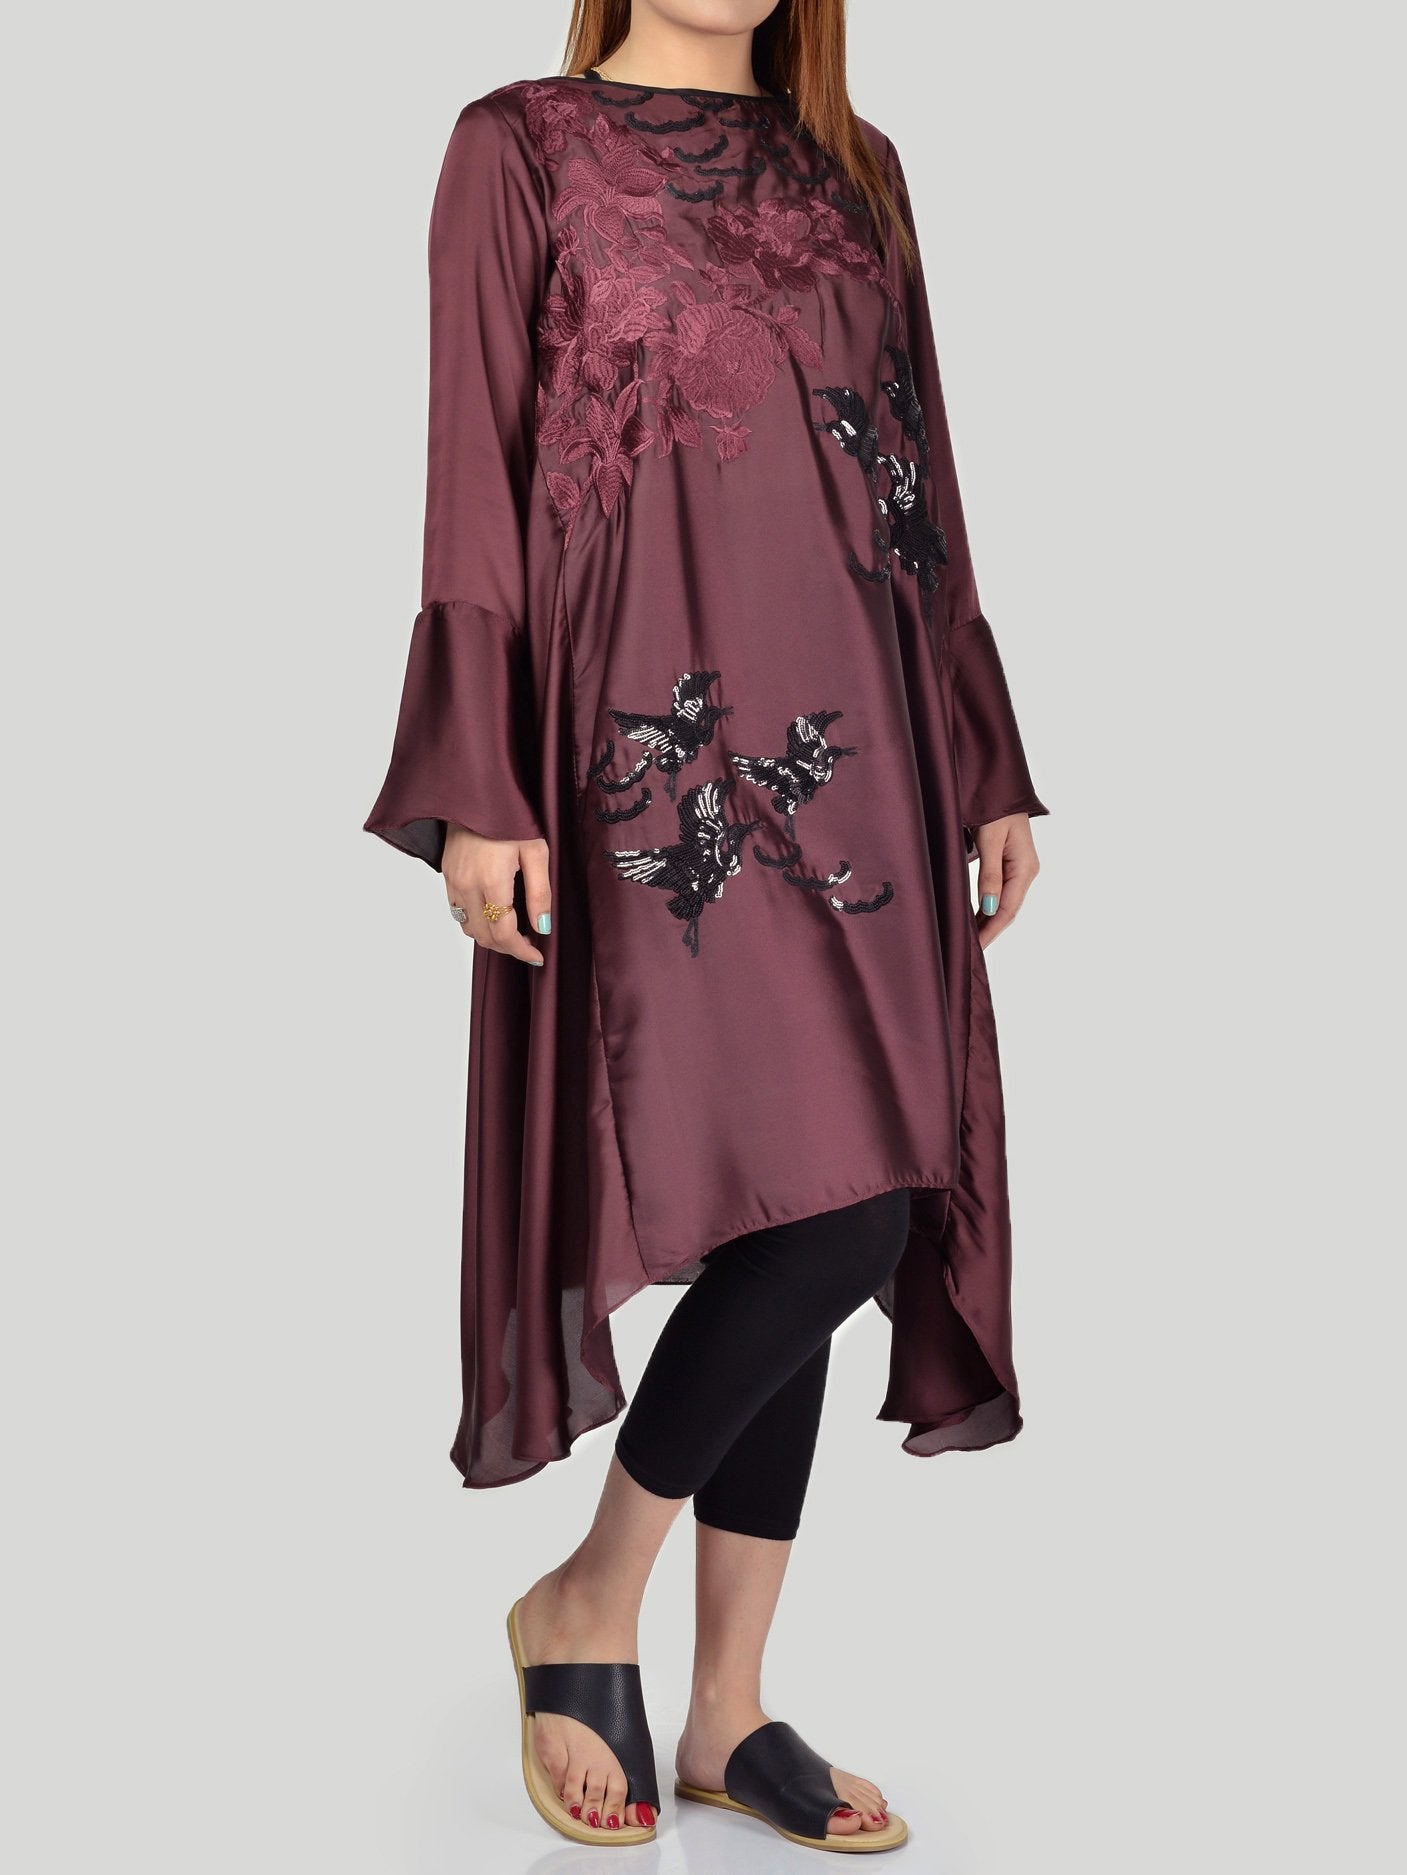 Embroidered Silk Shirt (F0673) by Limelight